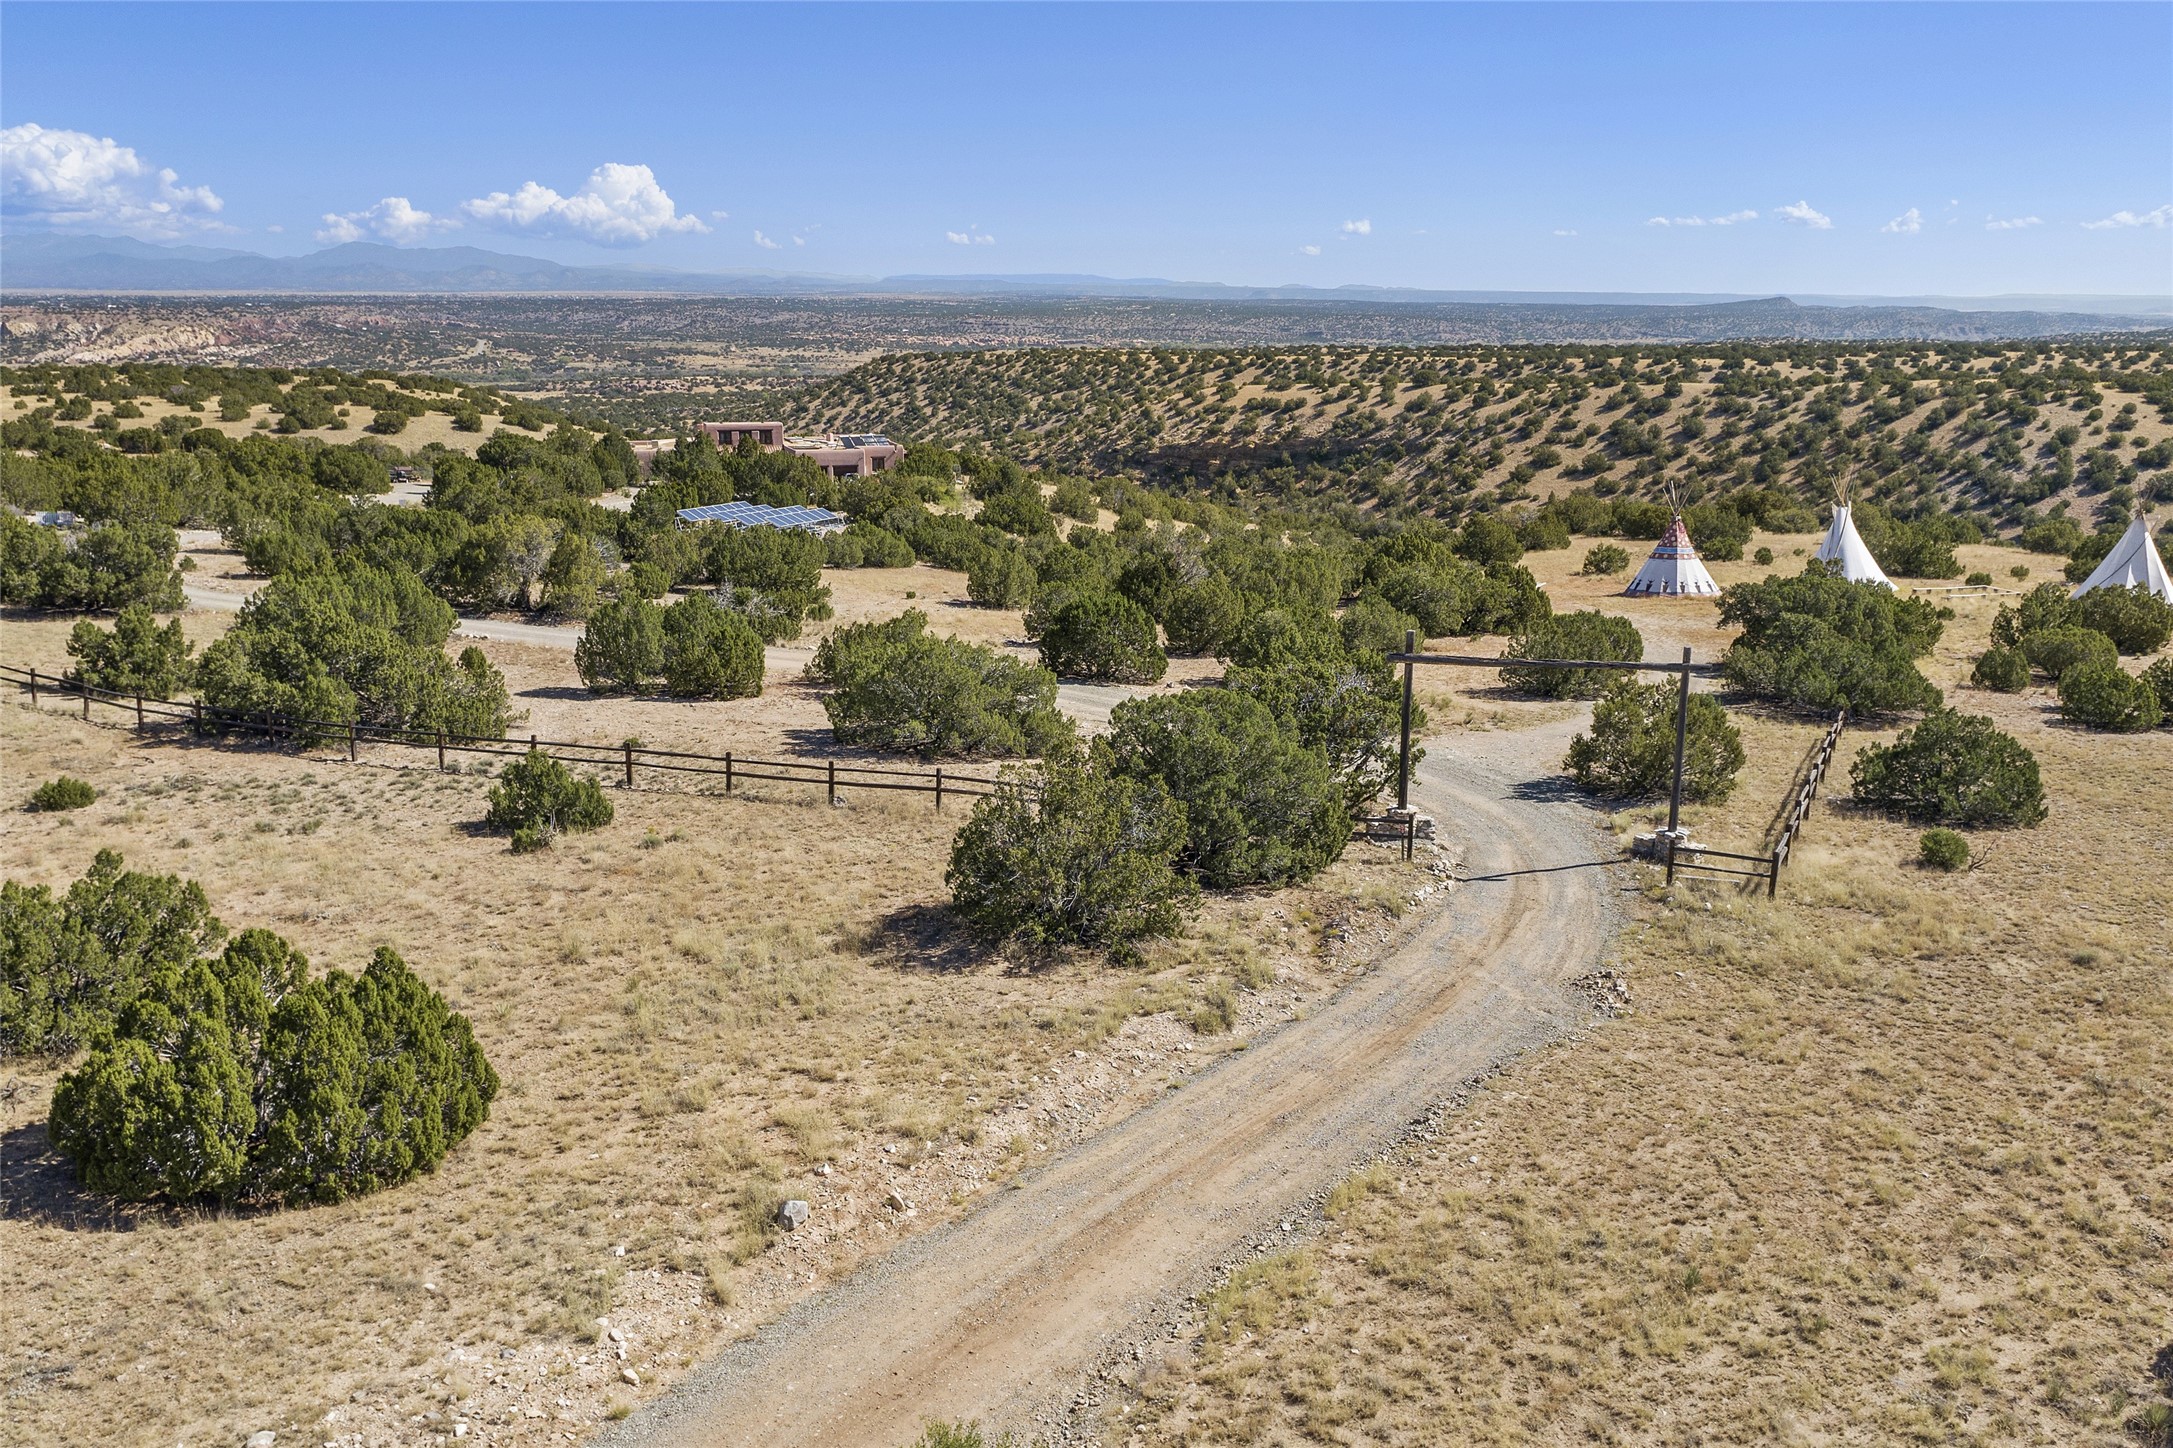 50 Gopeyka Canyon Road, Cerrillos, New Mexico 87010, 4 Bedrooms Bedrooms, ,3 BathroomsBathrooms,Residential,For Sale,50 Gopeyka Canyon Road,202401306